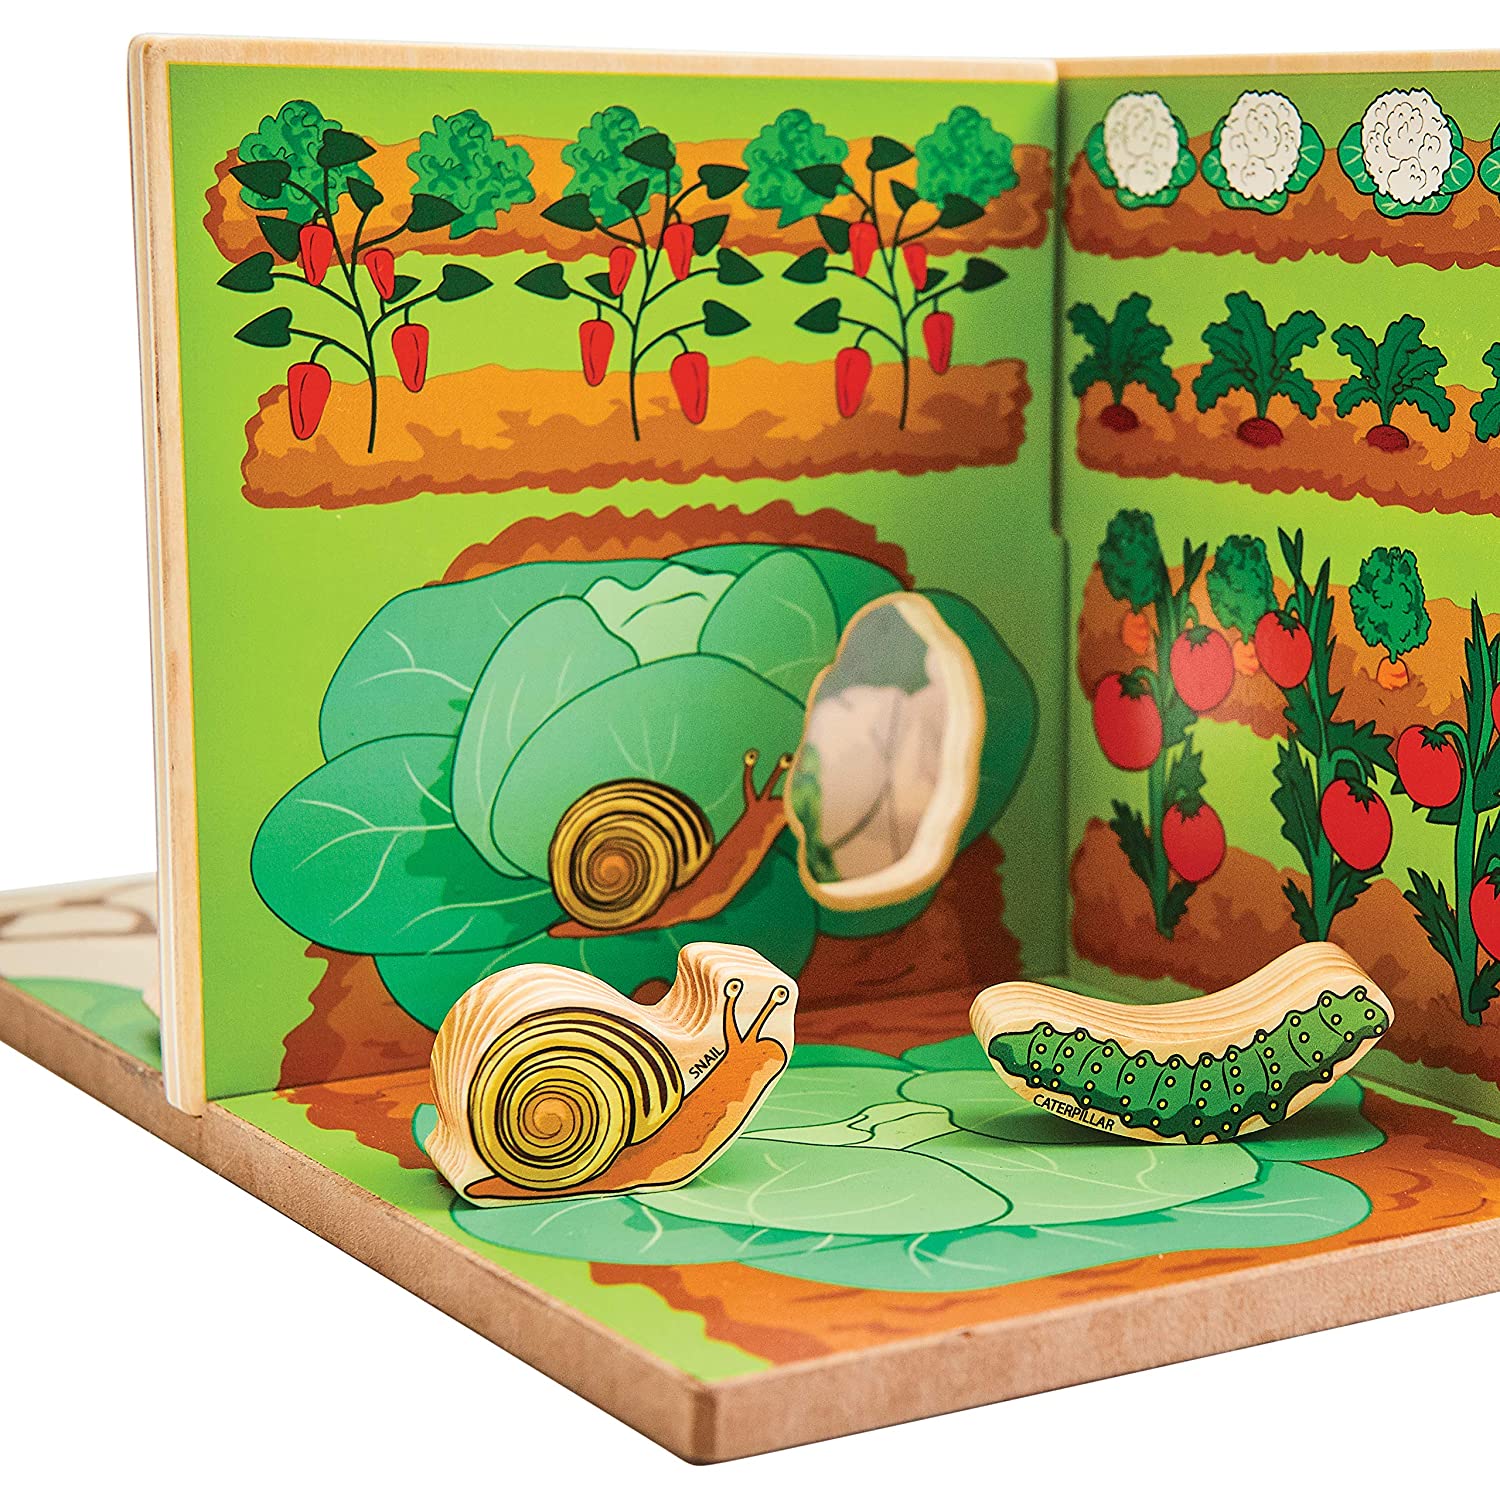 Pretend ’n’ Play Happy Minibeasts, Introducing the ultimate educational toy for curious young minds - the interactive minibeast scene set! This engaging and playful set includes 6 different interconnecting scenes, featuring a variety of fascinating minibeasts such as caterpillars, beetles, spiders, and worms, to name just a few. Your child will love learning all about the bugs in their environment while exploring the different parts of the set and engaging in imaginative play.With 15 pieces in total, includ